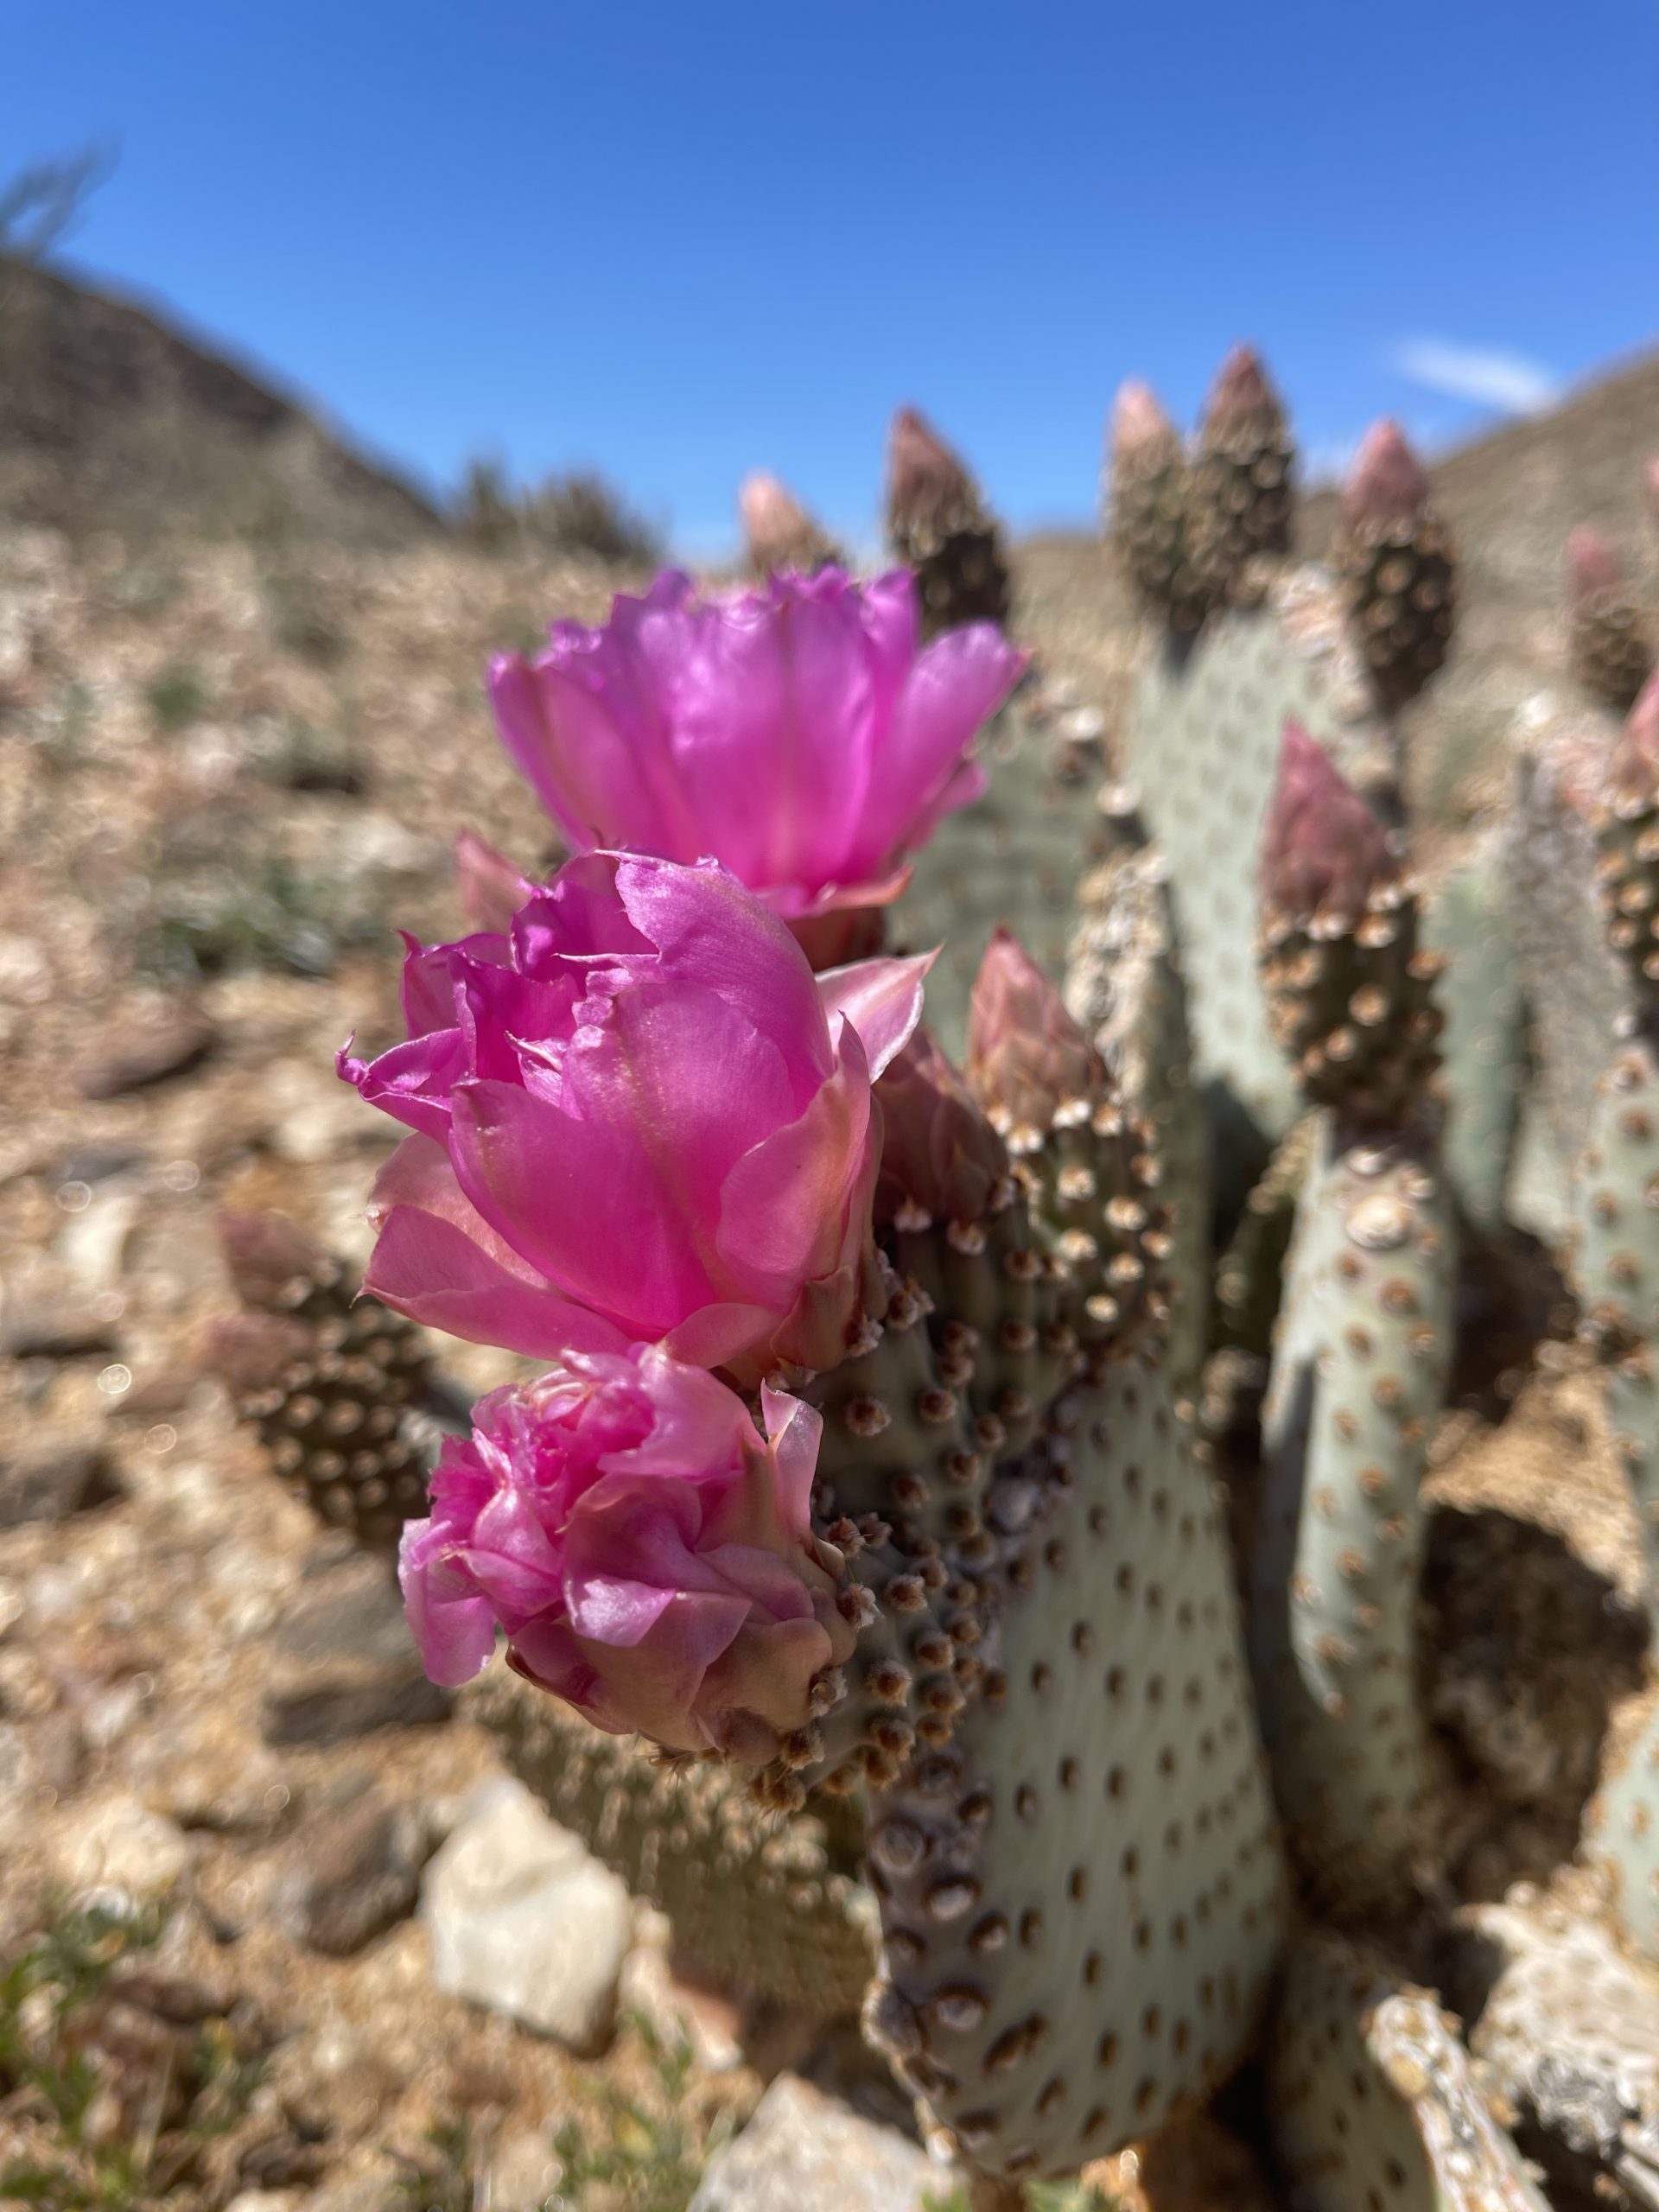 Tracking Down Cactus Blooms In Anza Borrego